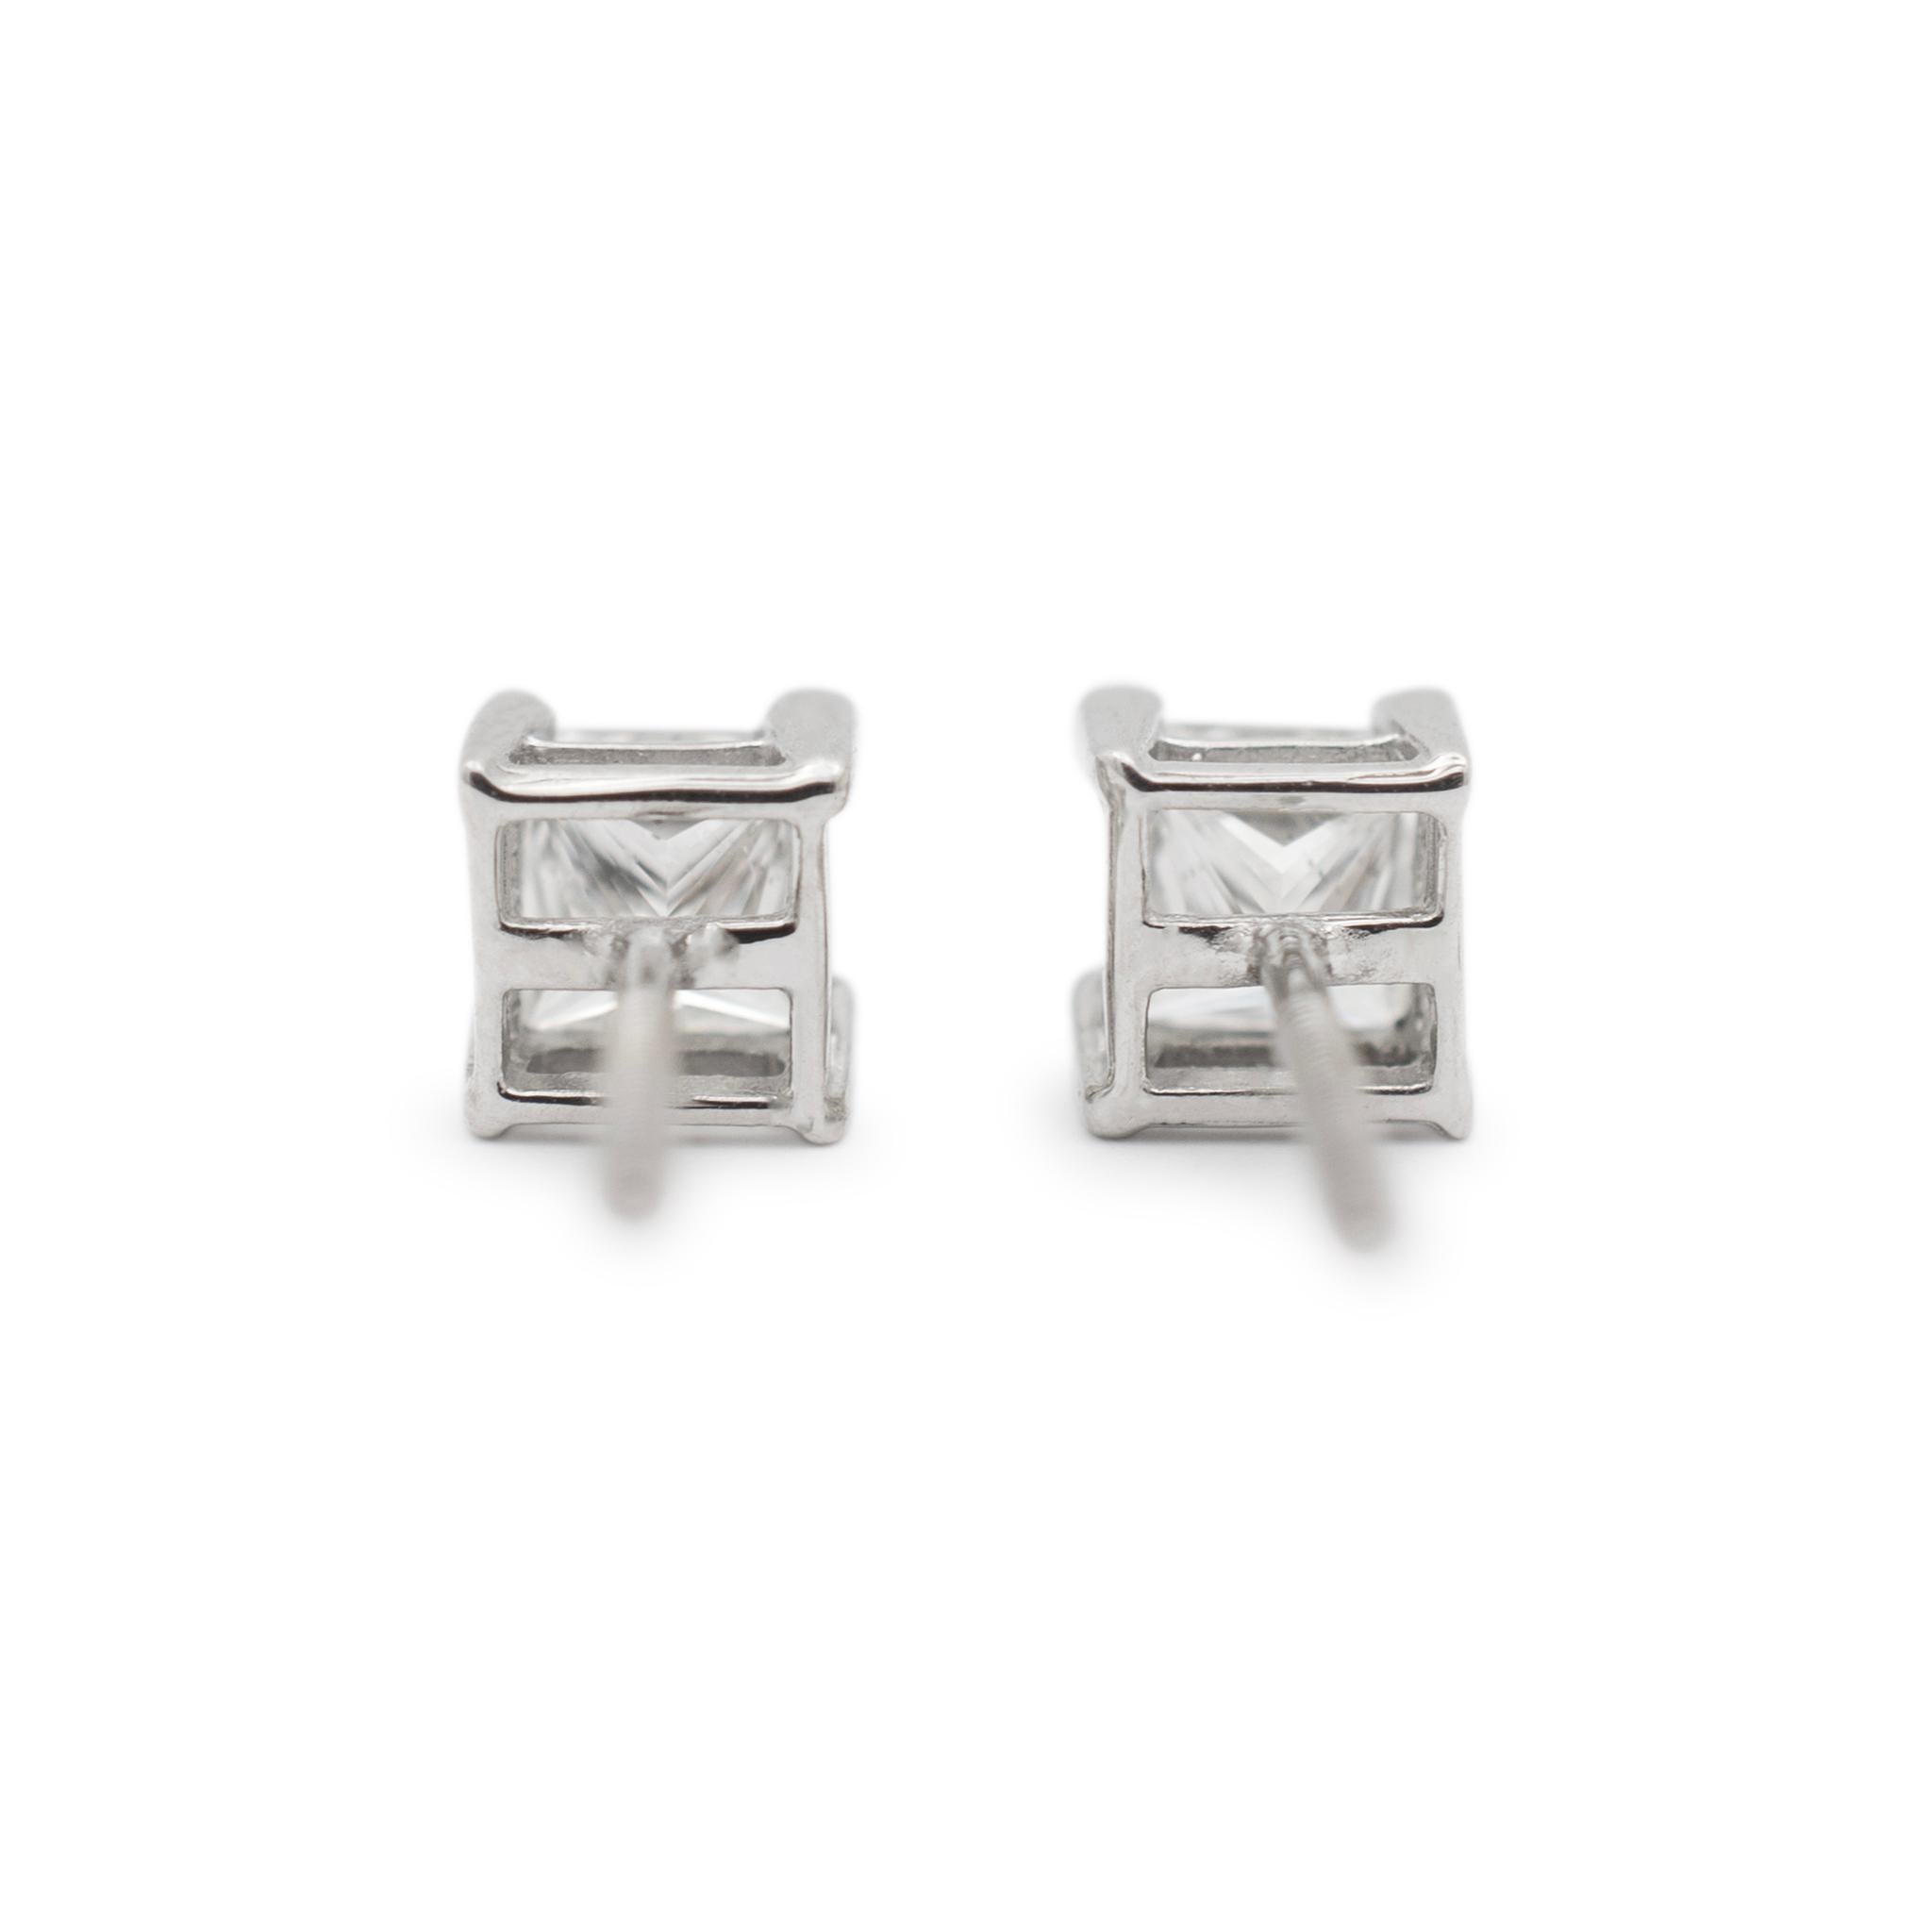 Gender: Ladies

Metal Type: 14K White Gold

Length: 0.50 Inches

Width: 5.50 mm

Weight: 1.56 grams

Ladies 14K white gold diamond stud earrings with screw backs. The metal was tested and determined to be 14K white gold. Engraved with